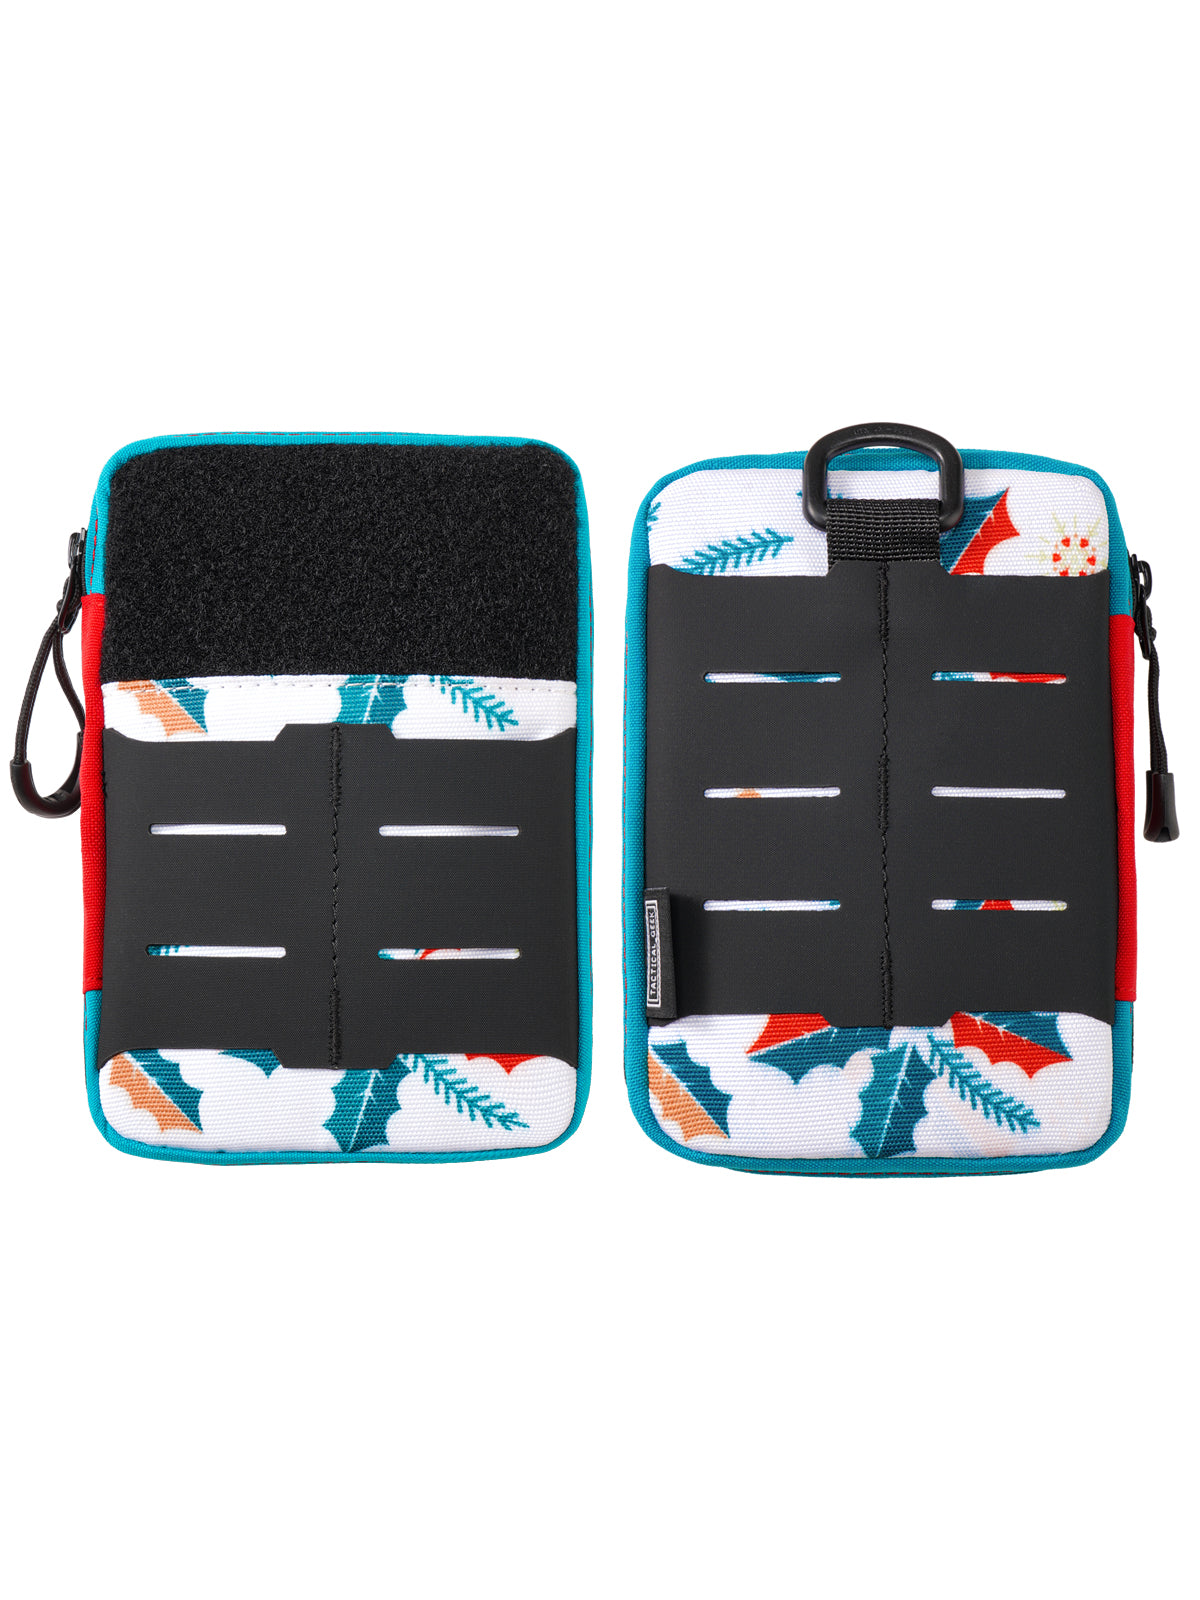 Block E 2.0 Multifunctional EDC storage pouch (Christmas Limited Edition)